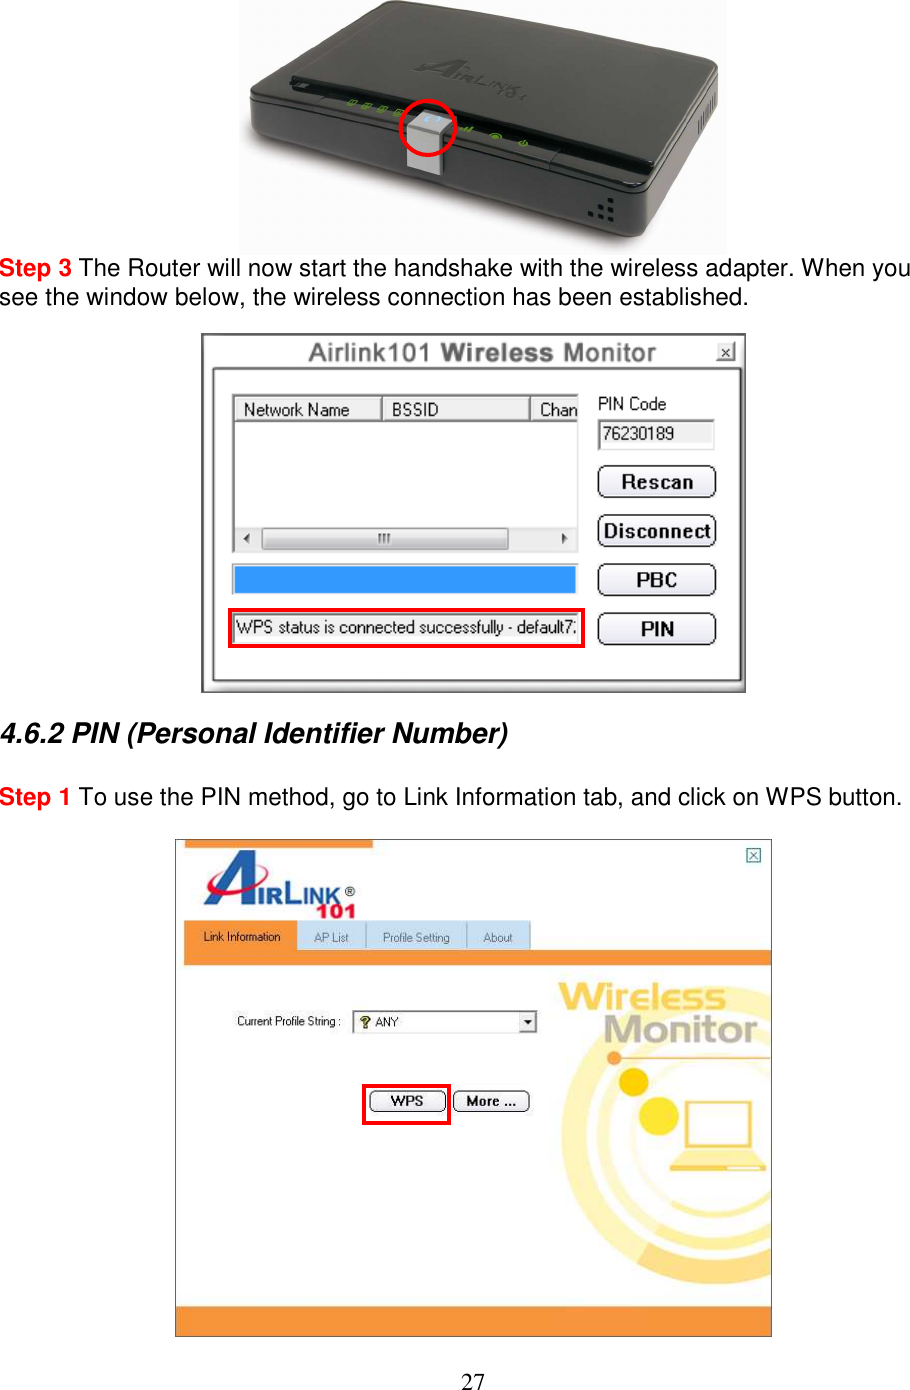 27  Step 3 The Router will now start the handshake with the wireless adapter. When you see the window below, the wireless connection has been established.    4.6.2 PIN (Personal Identifier Number)  Step 1 To use the PIN method, go to Link Information tab, and click on WPS button.   